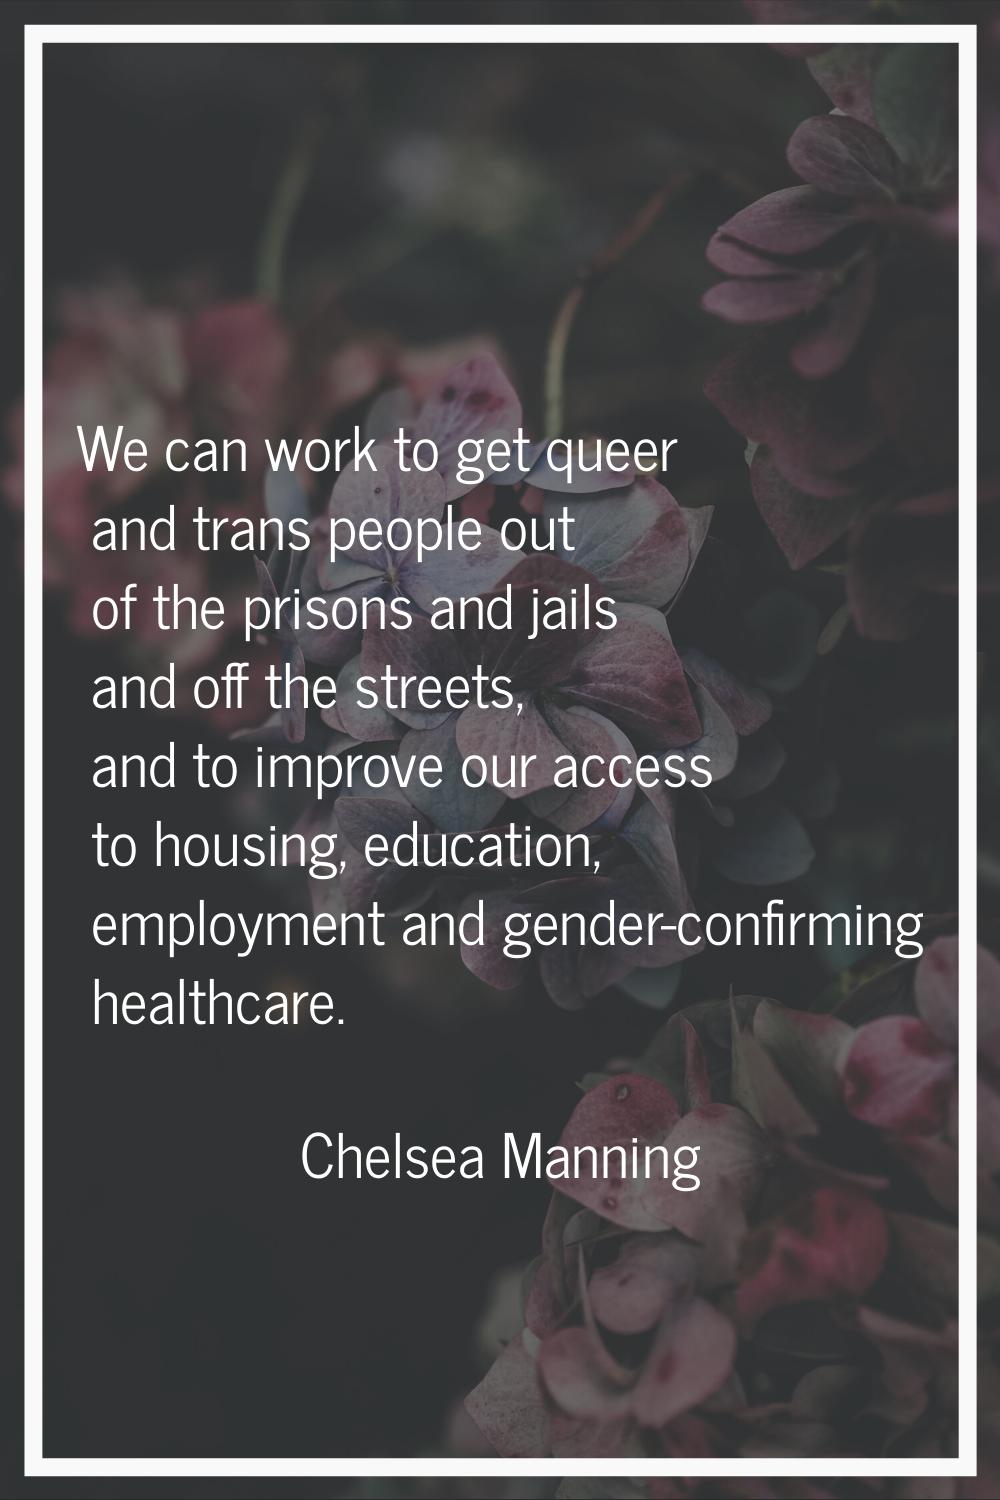 We can work to get queer and trans people out of the prisons and jails and off the streets, and to 